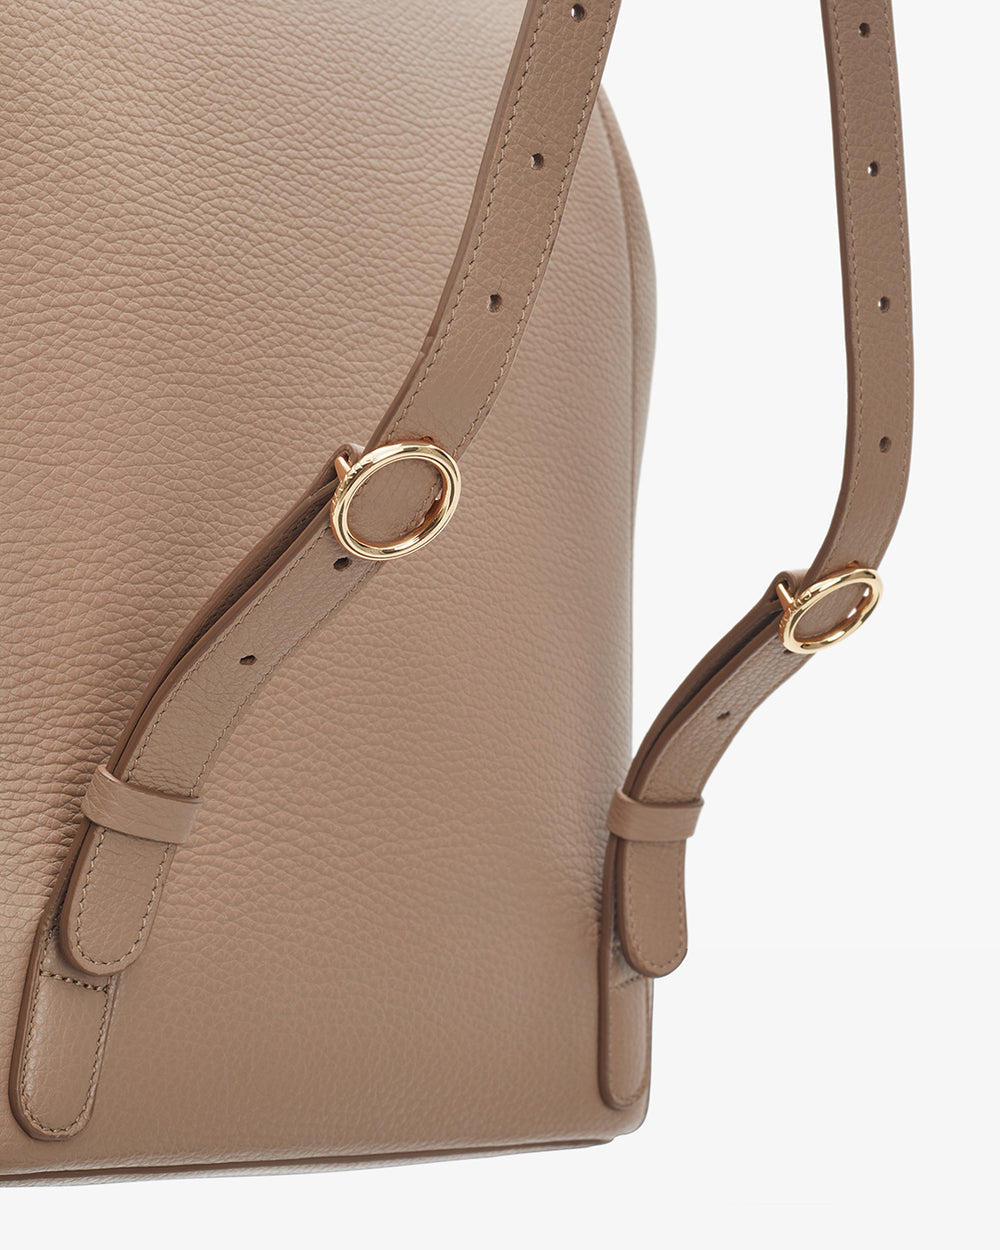 Close-up view of a bag with adjustable straps and metal rings.